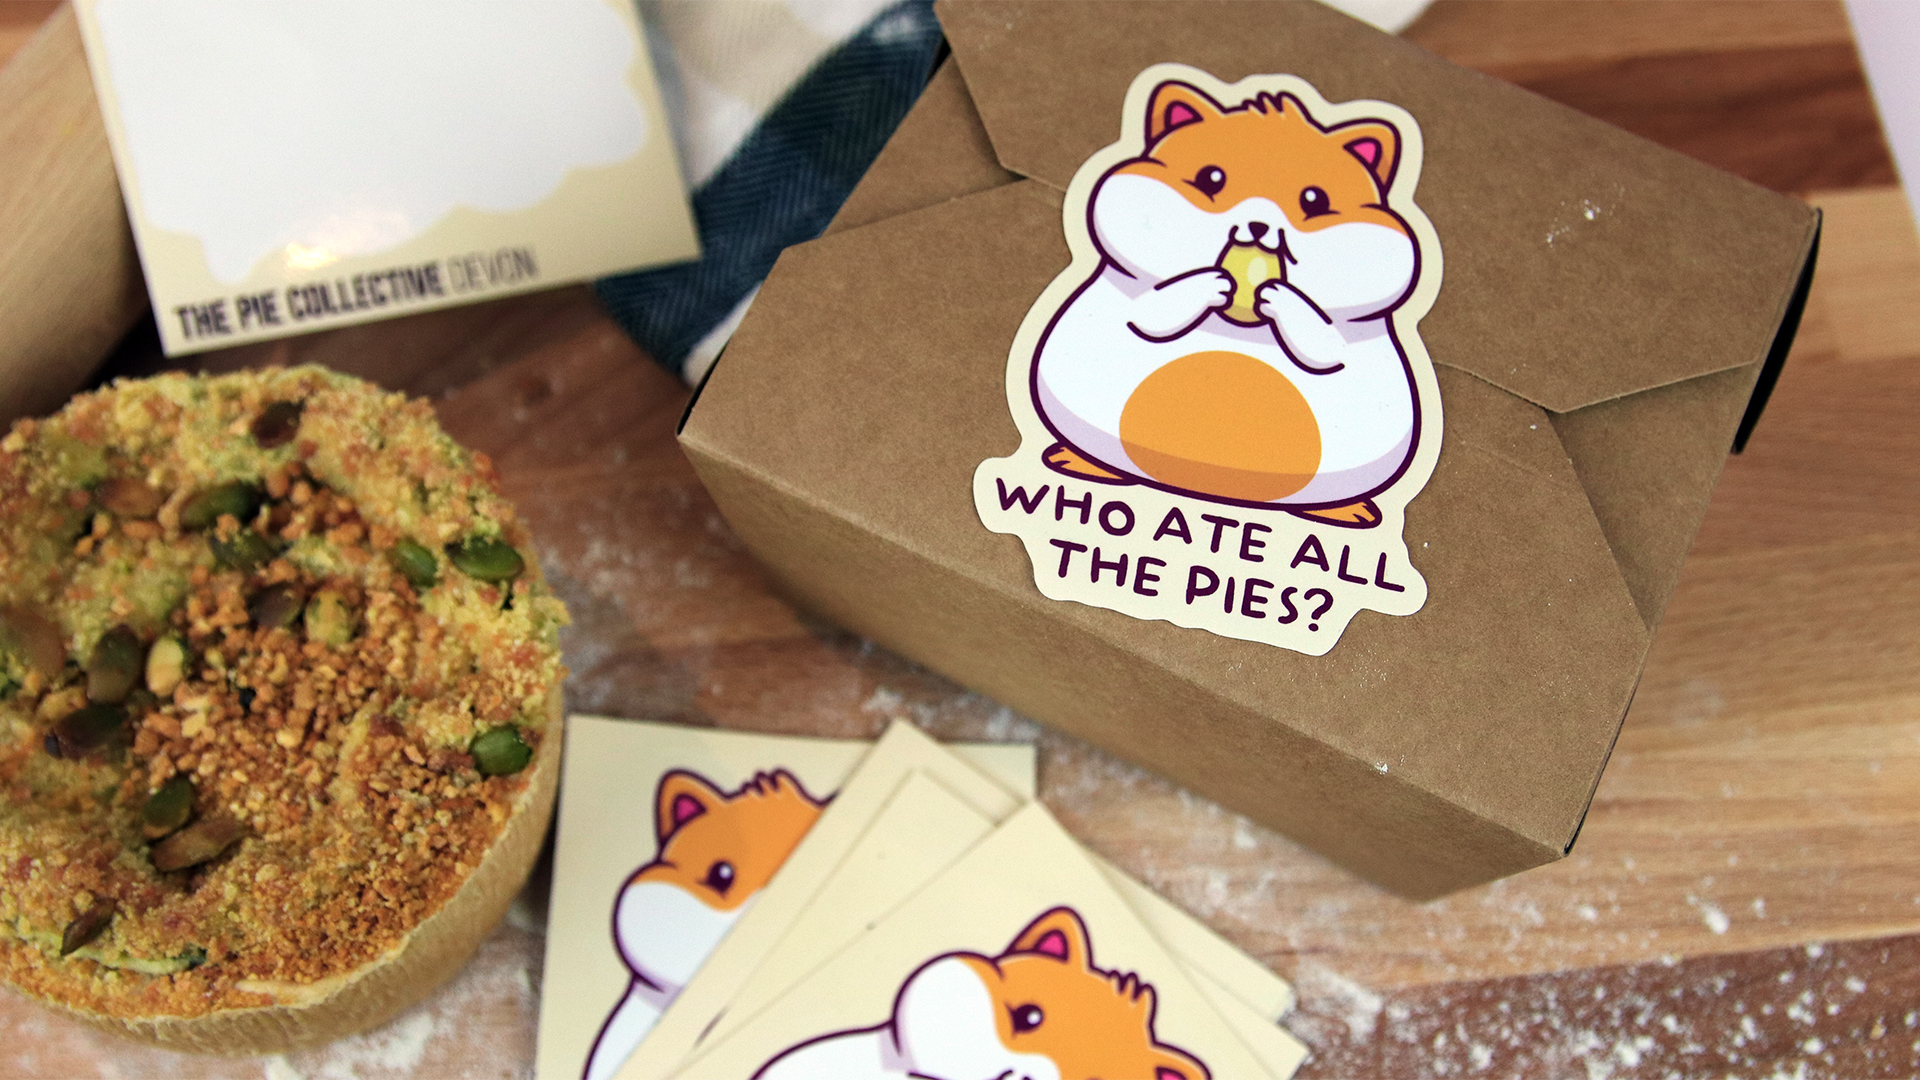 white-vinyl-kiss-cut-sticker-with-hamster-design-applied-to-a-cardboard-food-box.jpg